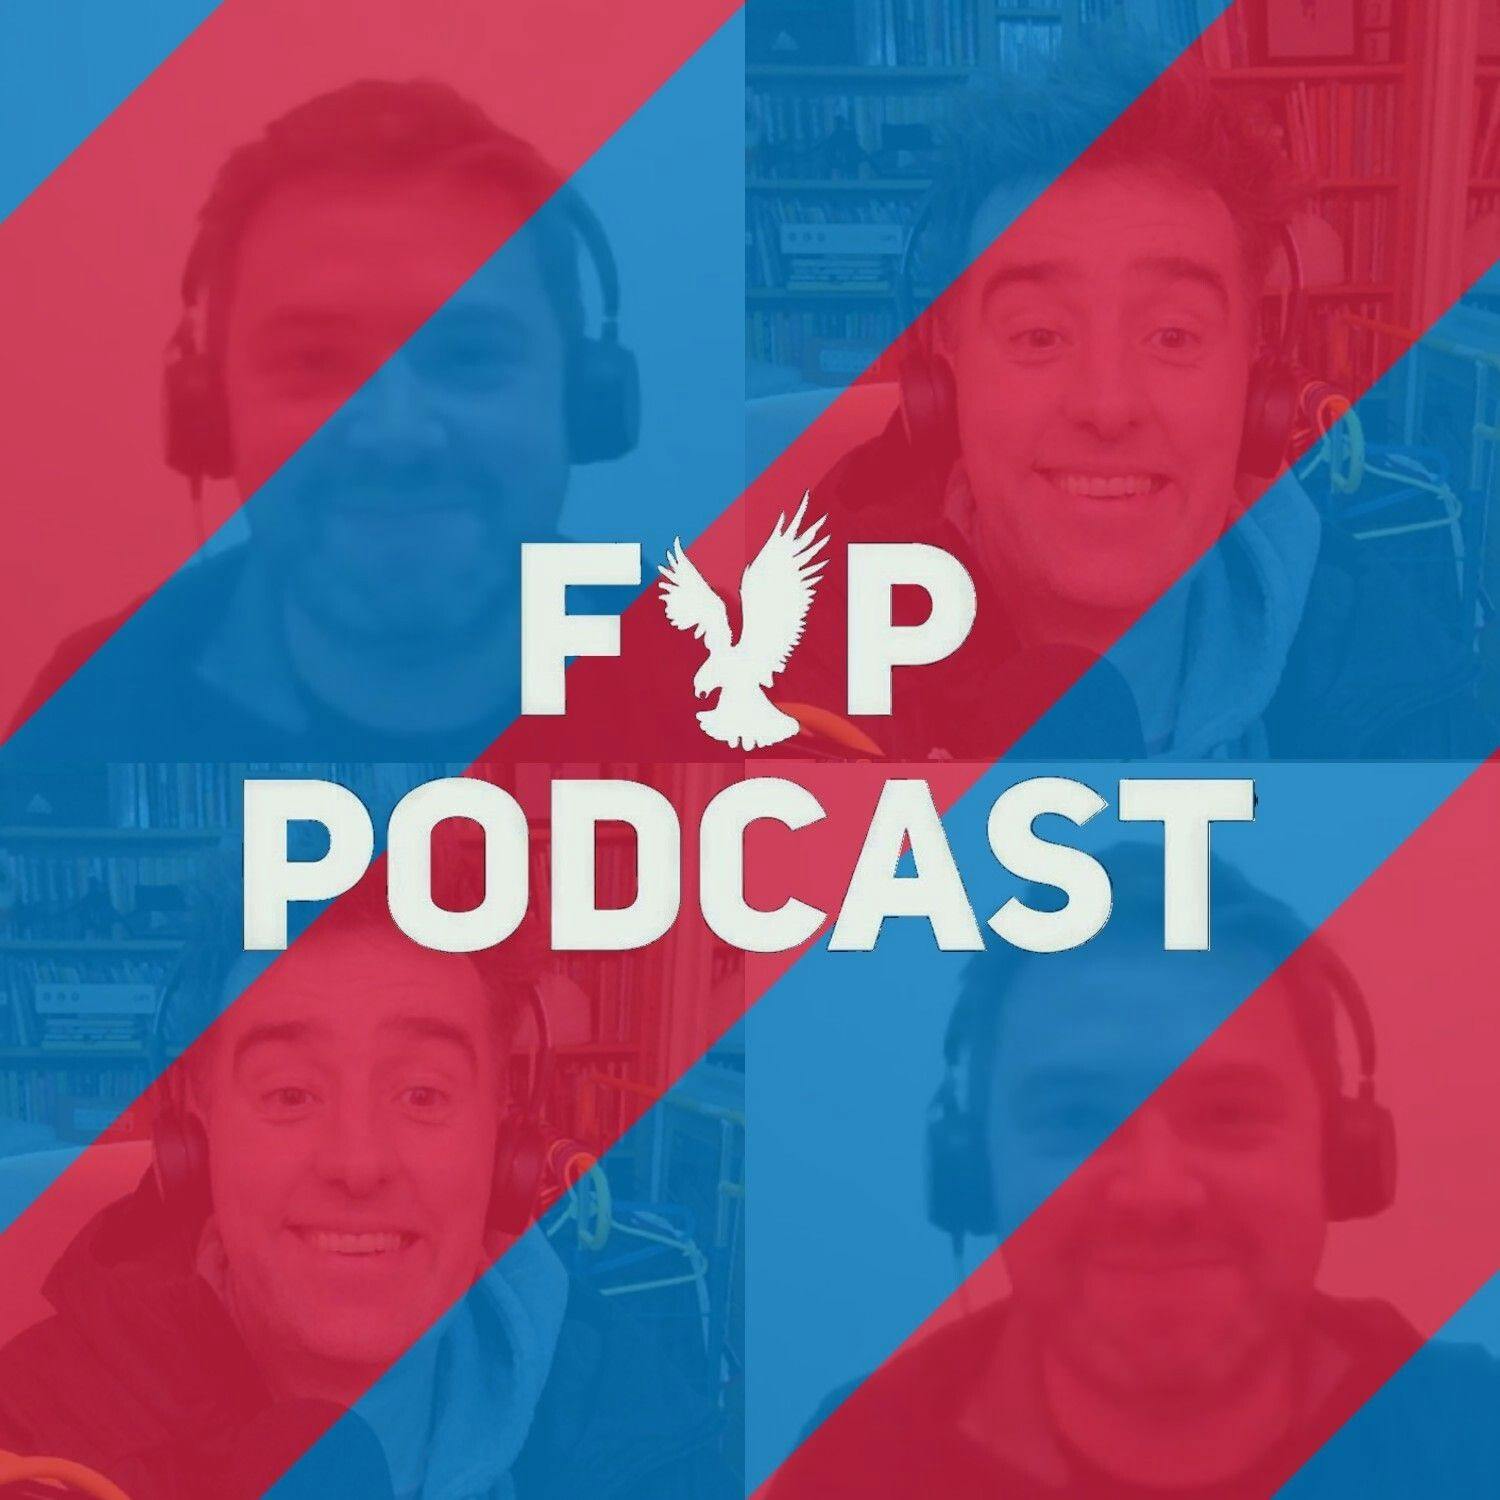 FYP Podcast 454 | More Questions Than Answers